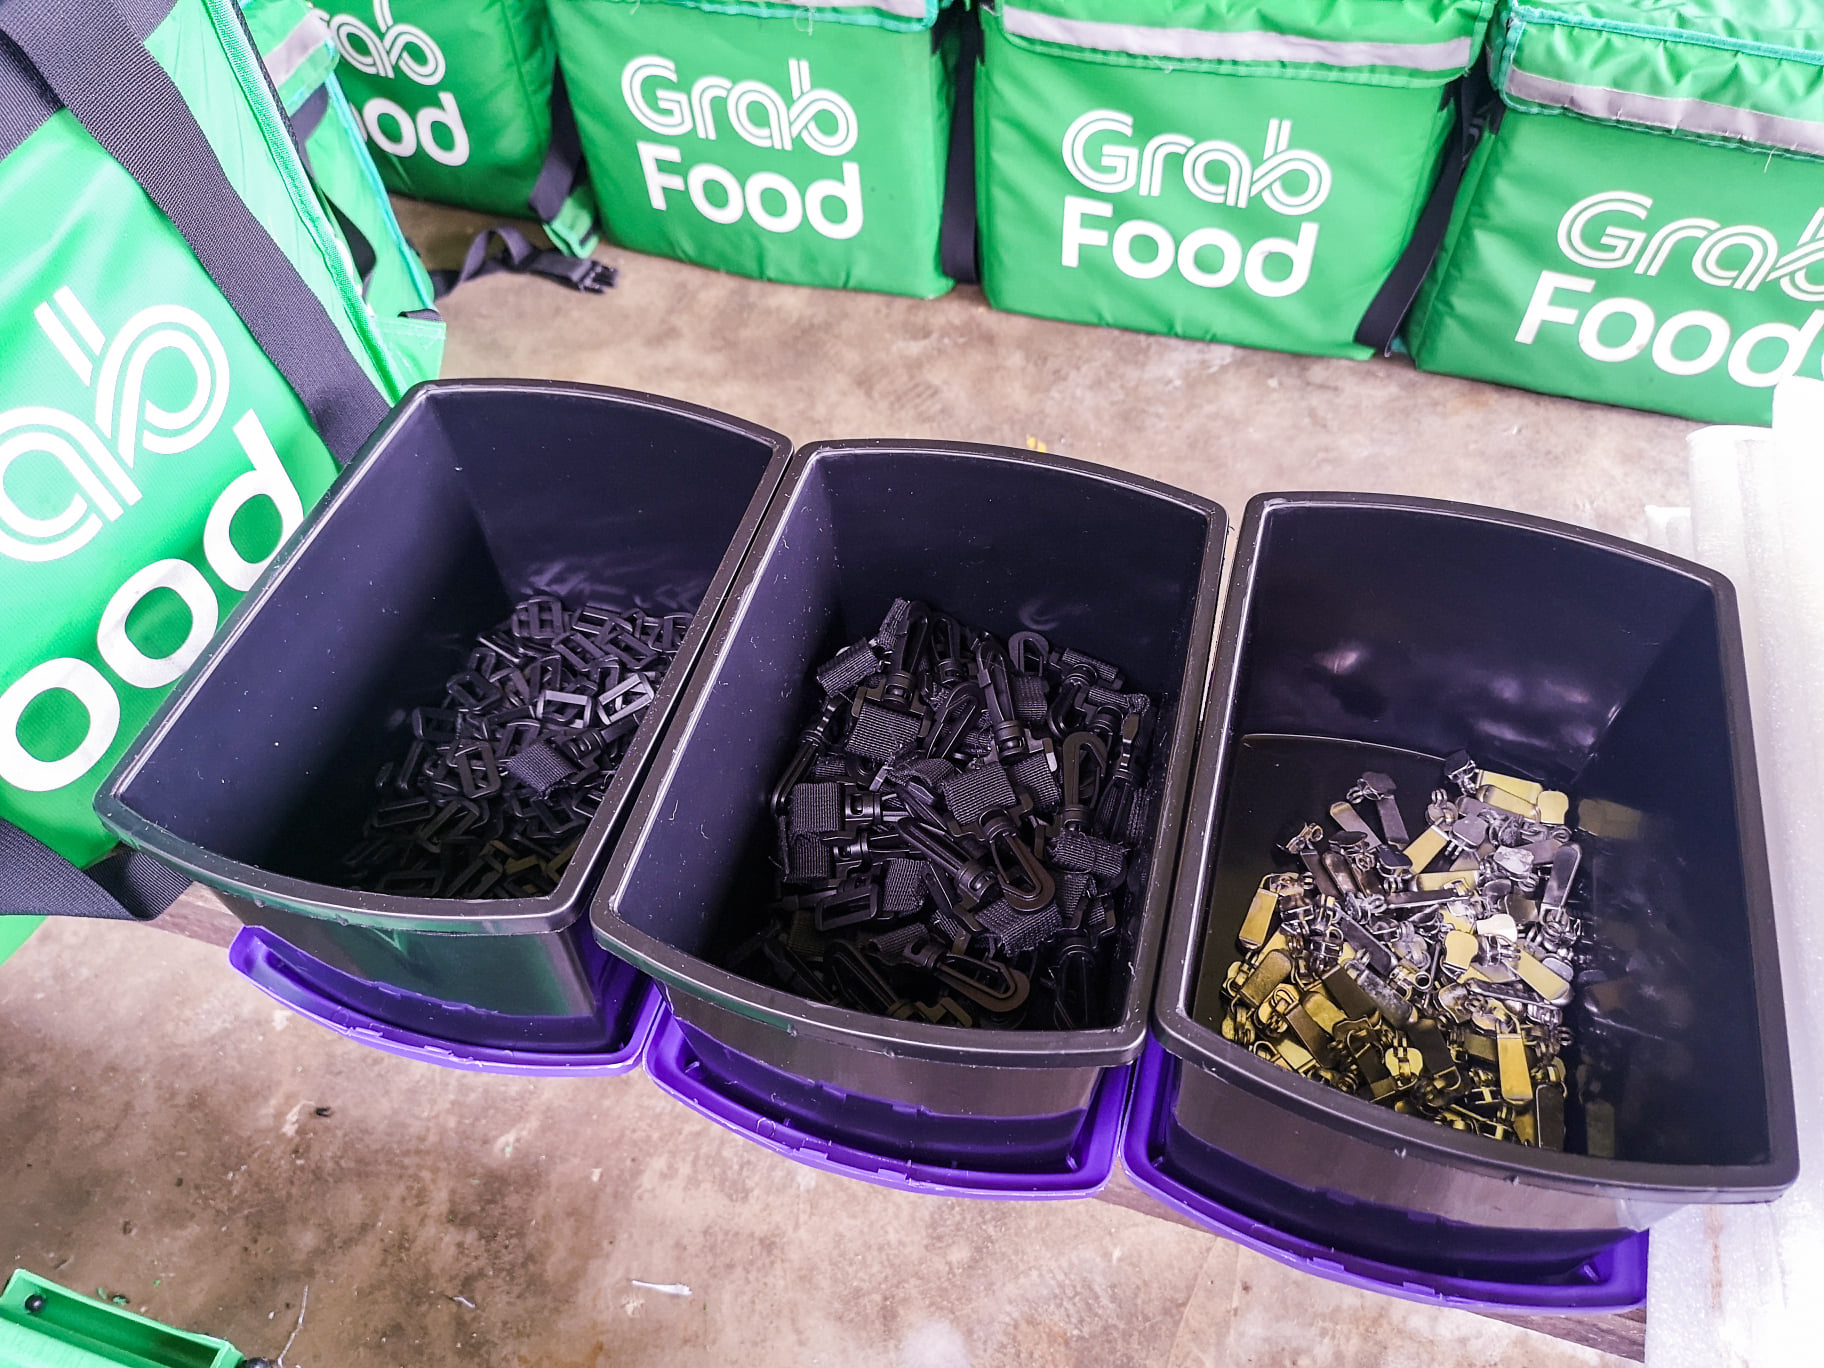 Usable parts of GrabFood delivery bags